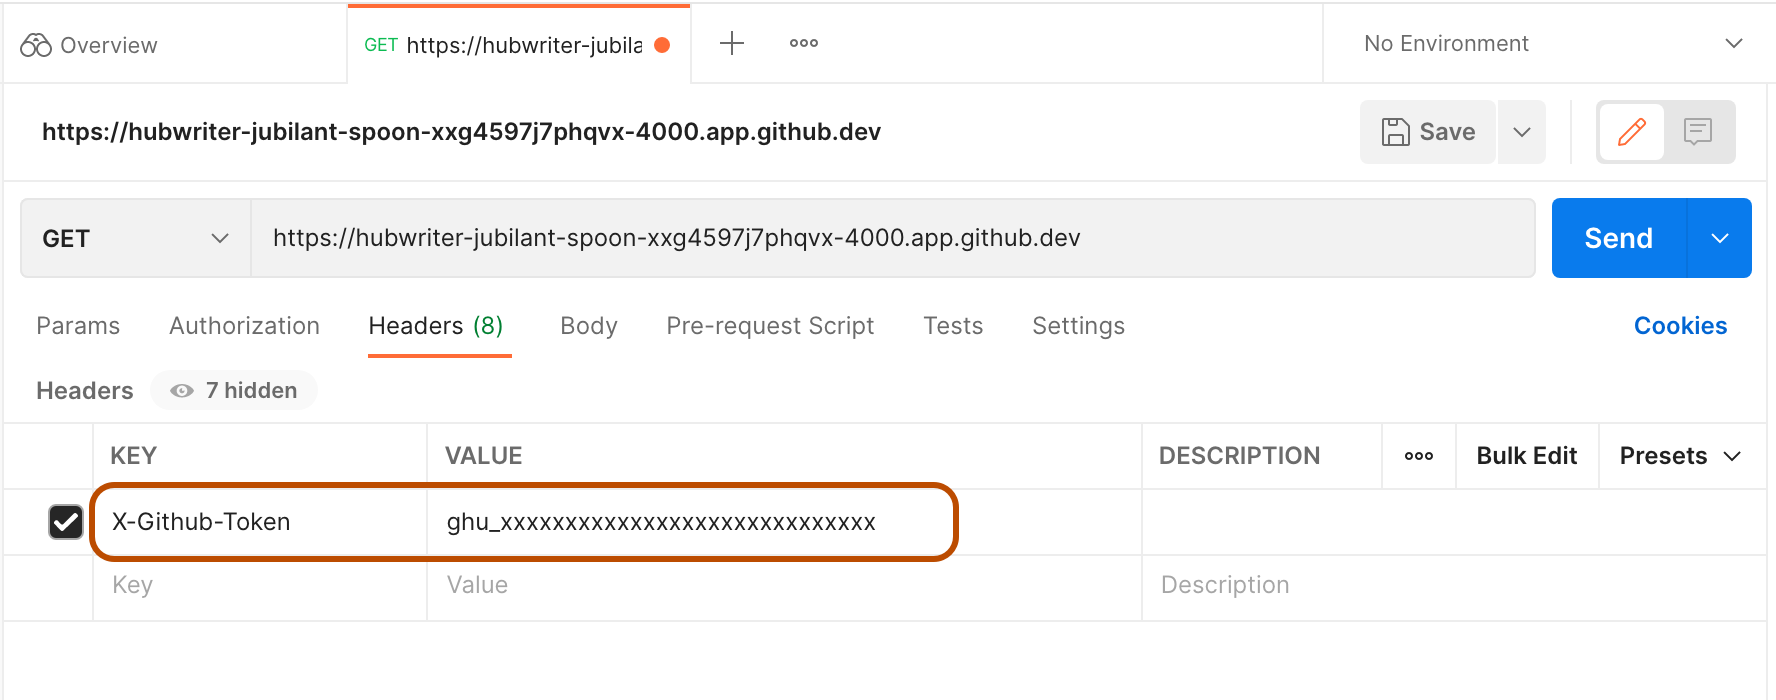 Screenshot of a dummy GITHUB_TOKEN, pasted into Postman as the value of the X-GitHub-Token key. The key and value are highlighted.